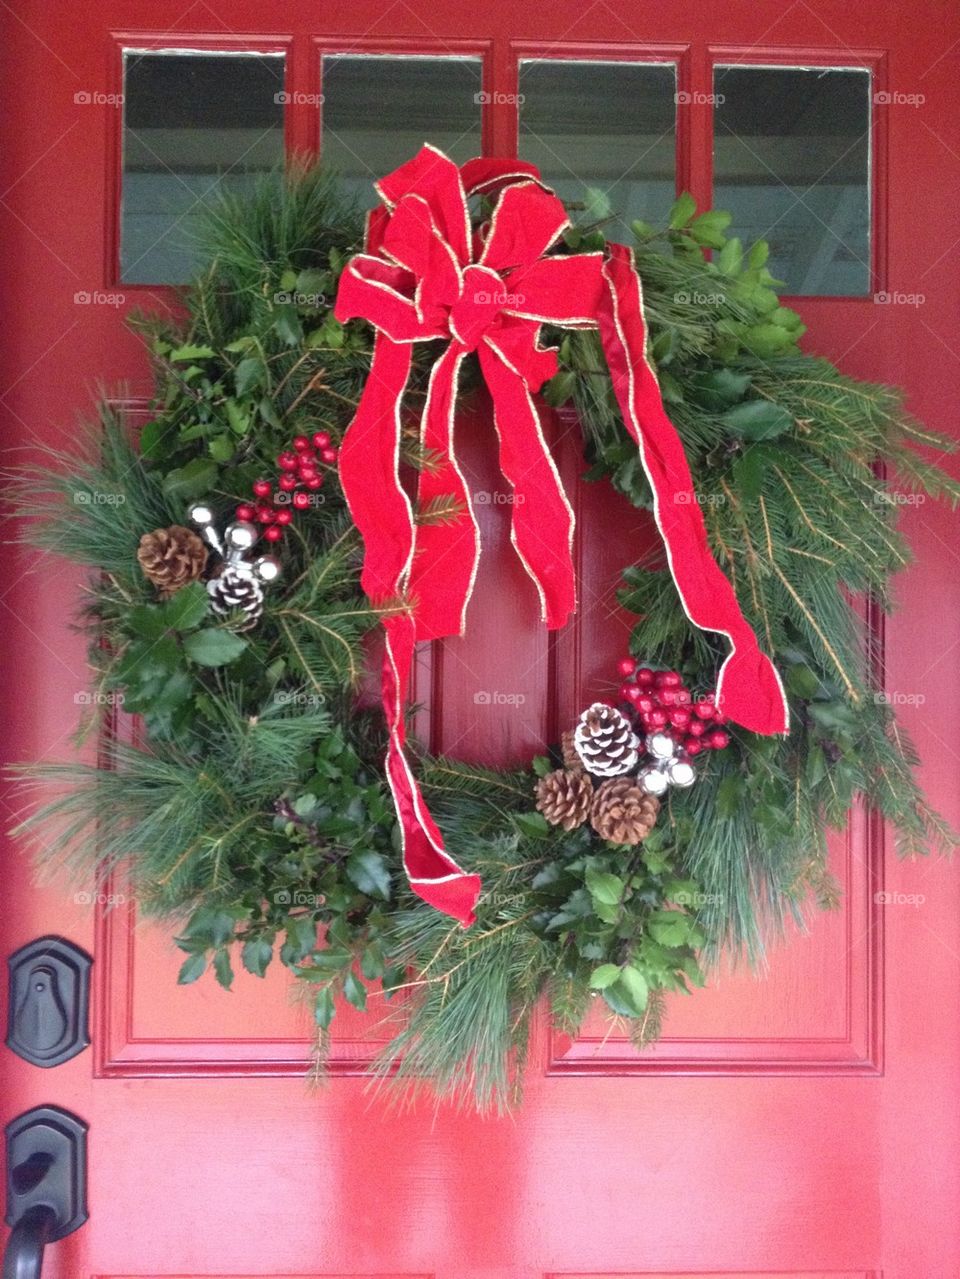 Handcrafted wreath